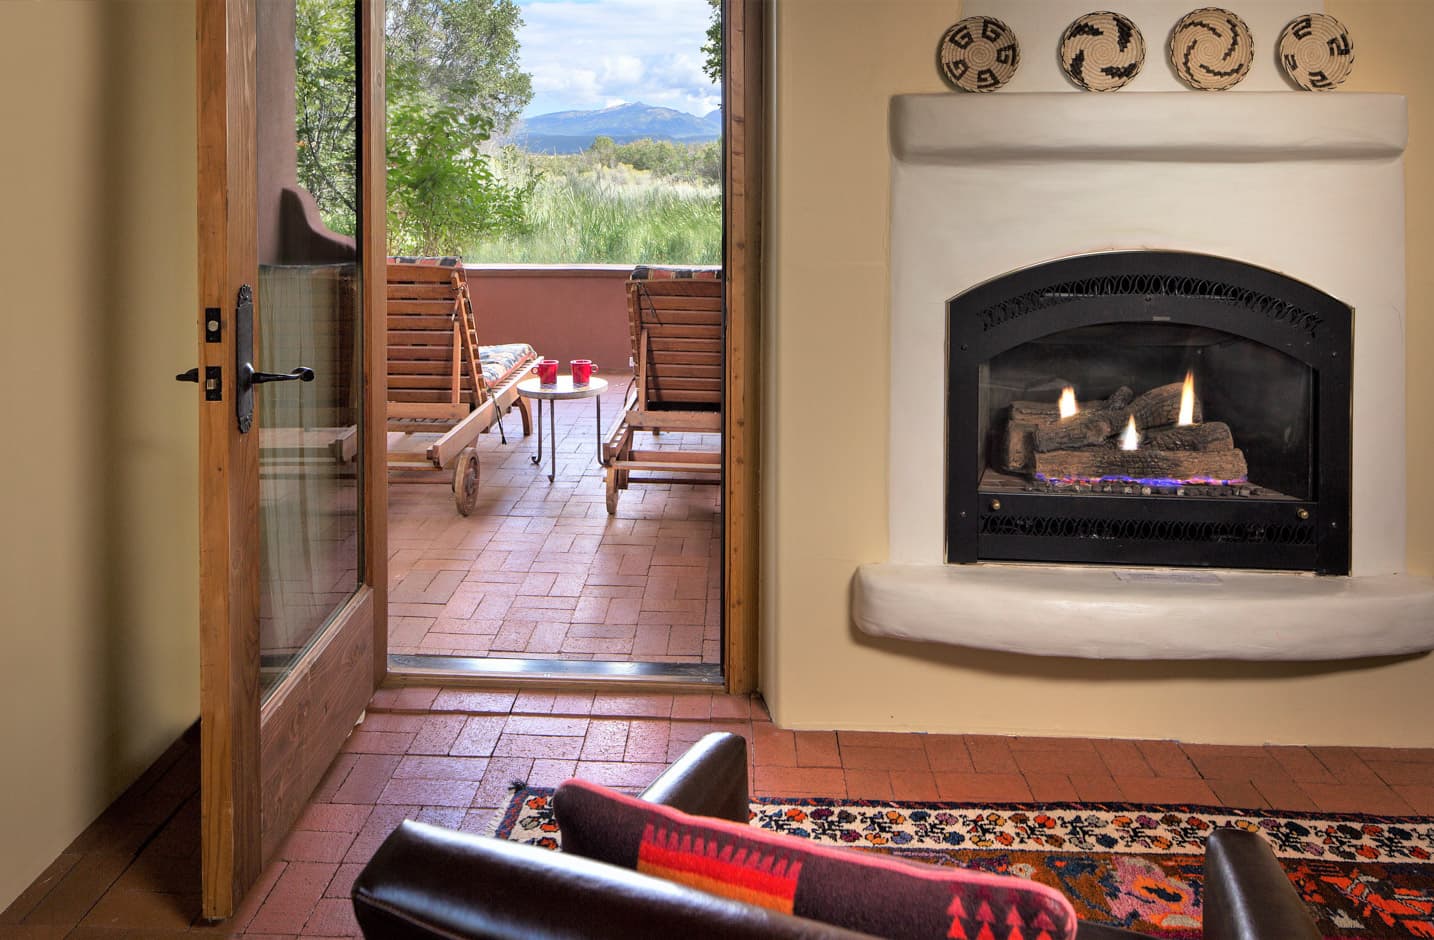 A gas firplace and a patio with two chairs and a view of a mountain